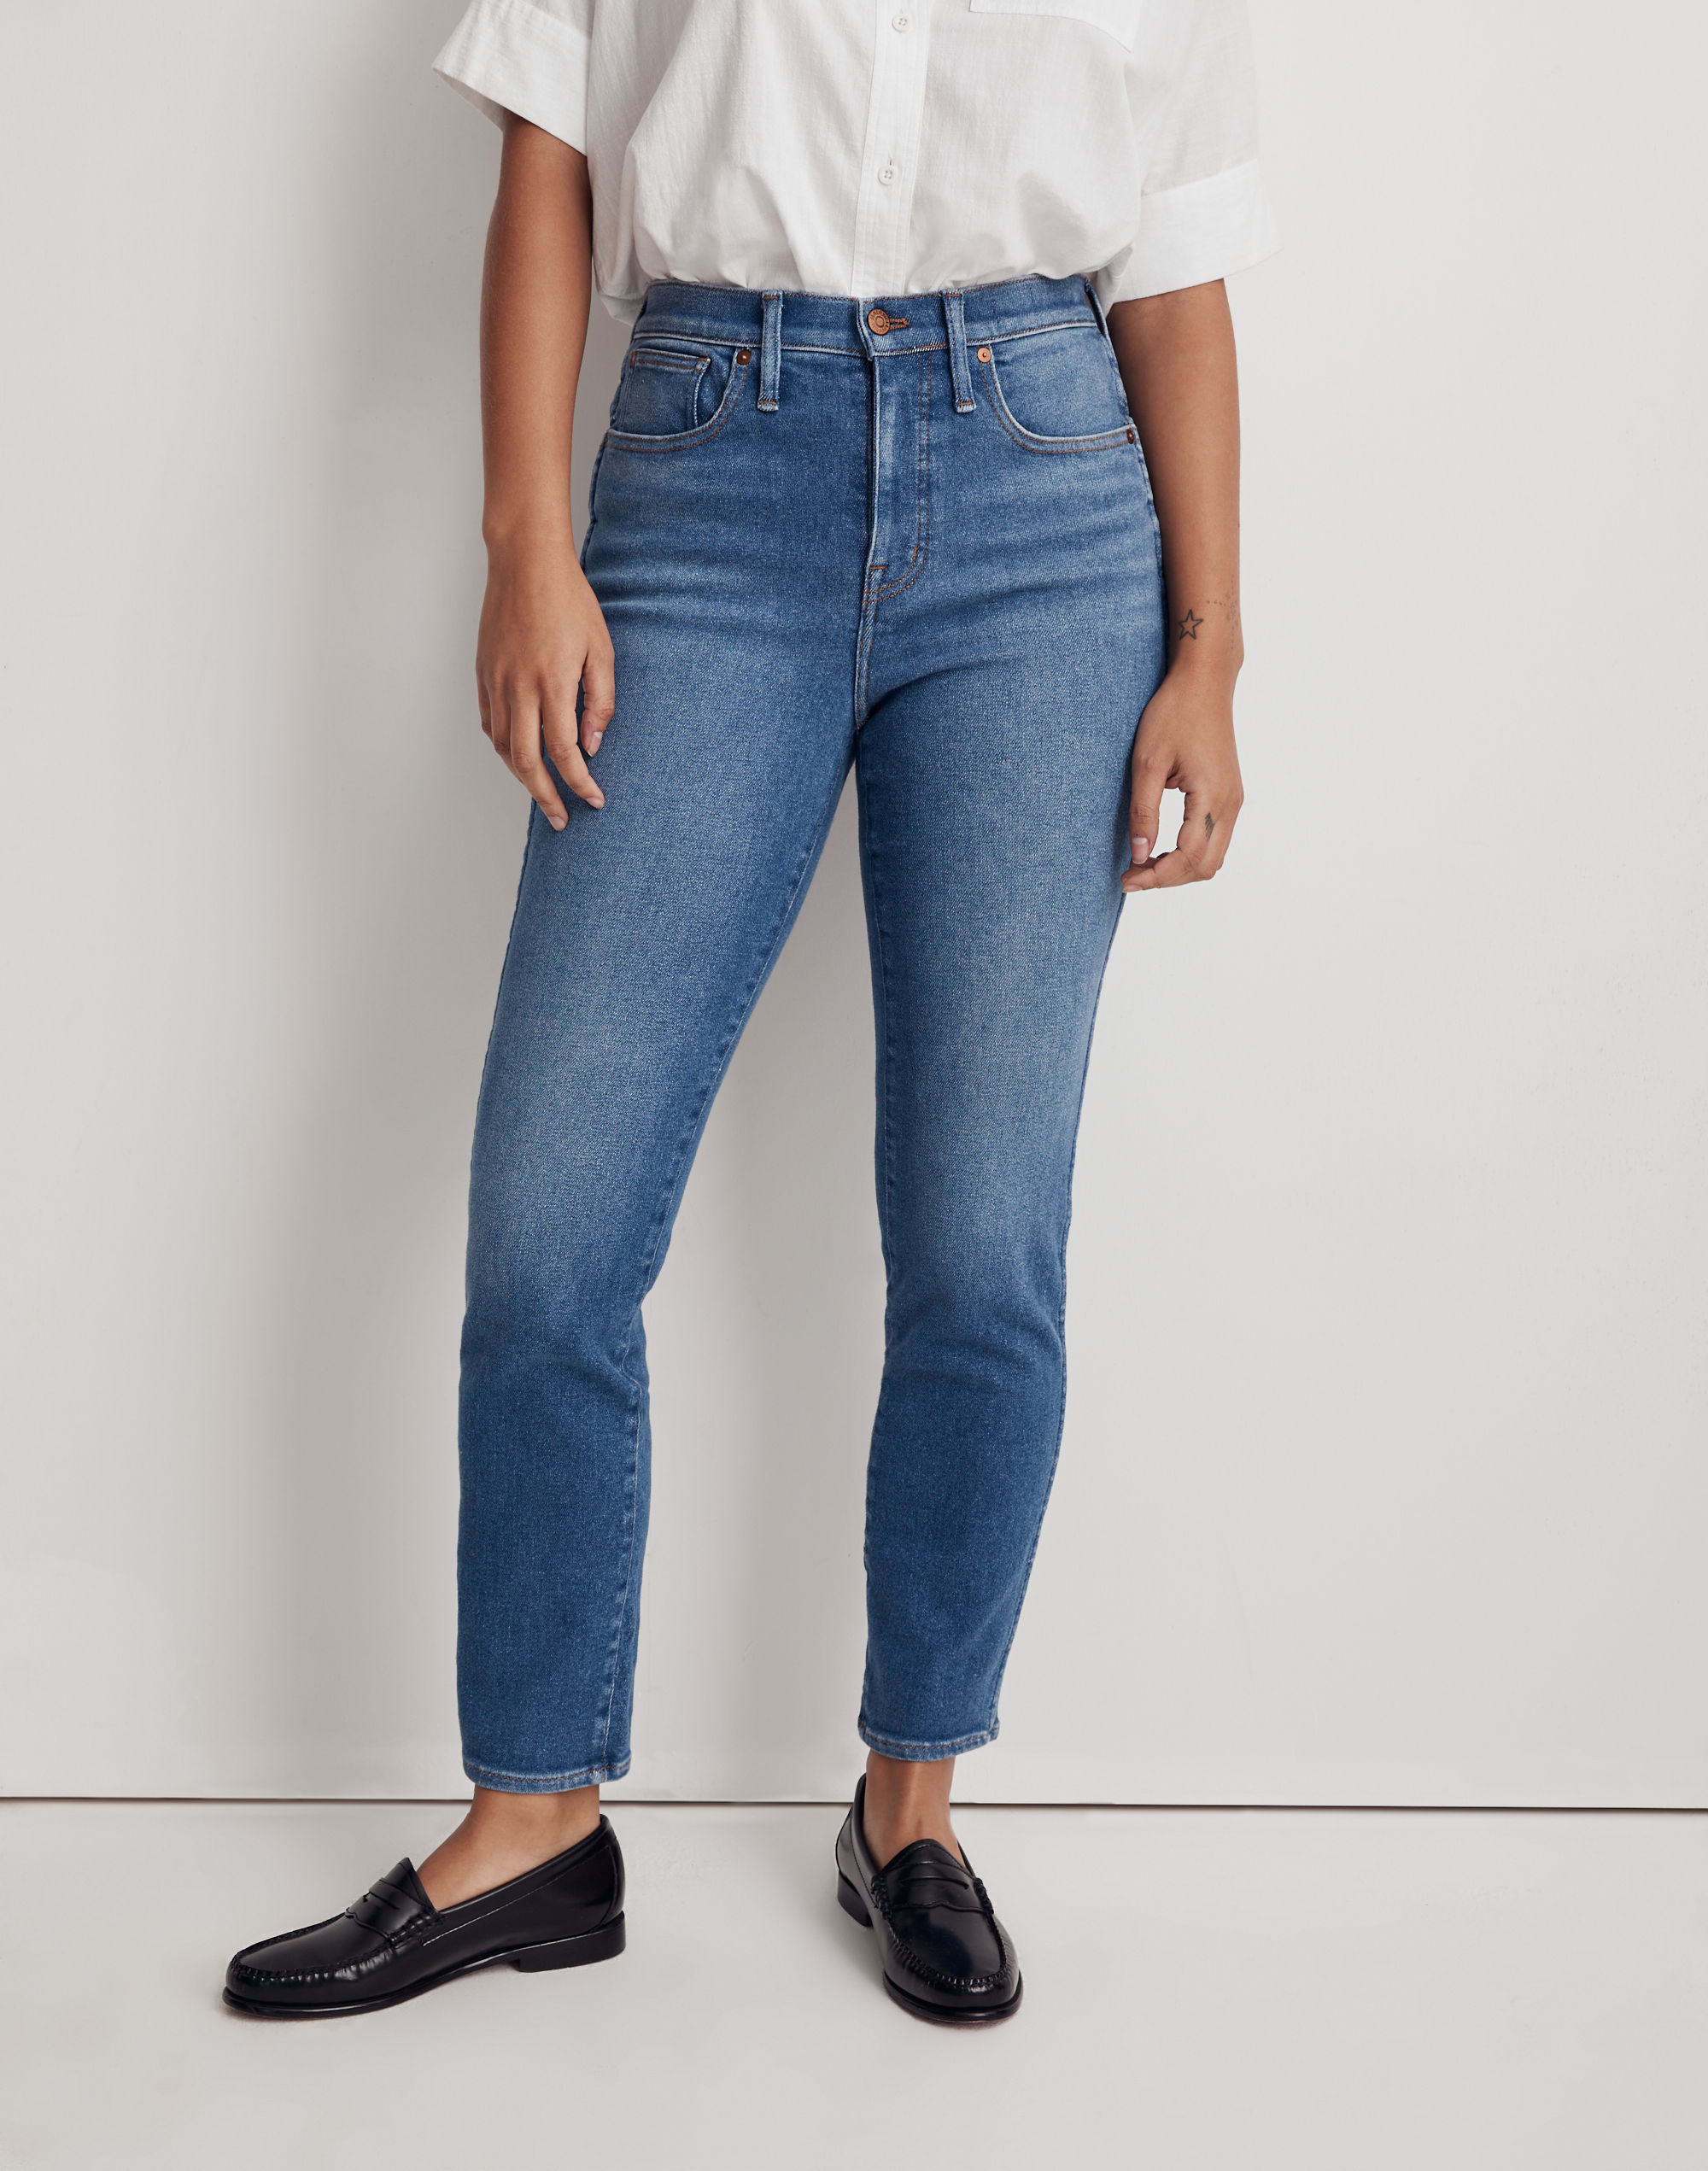 Curvy Stovepipe Jeans in Leaside Wash